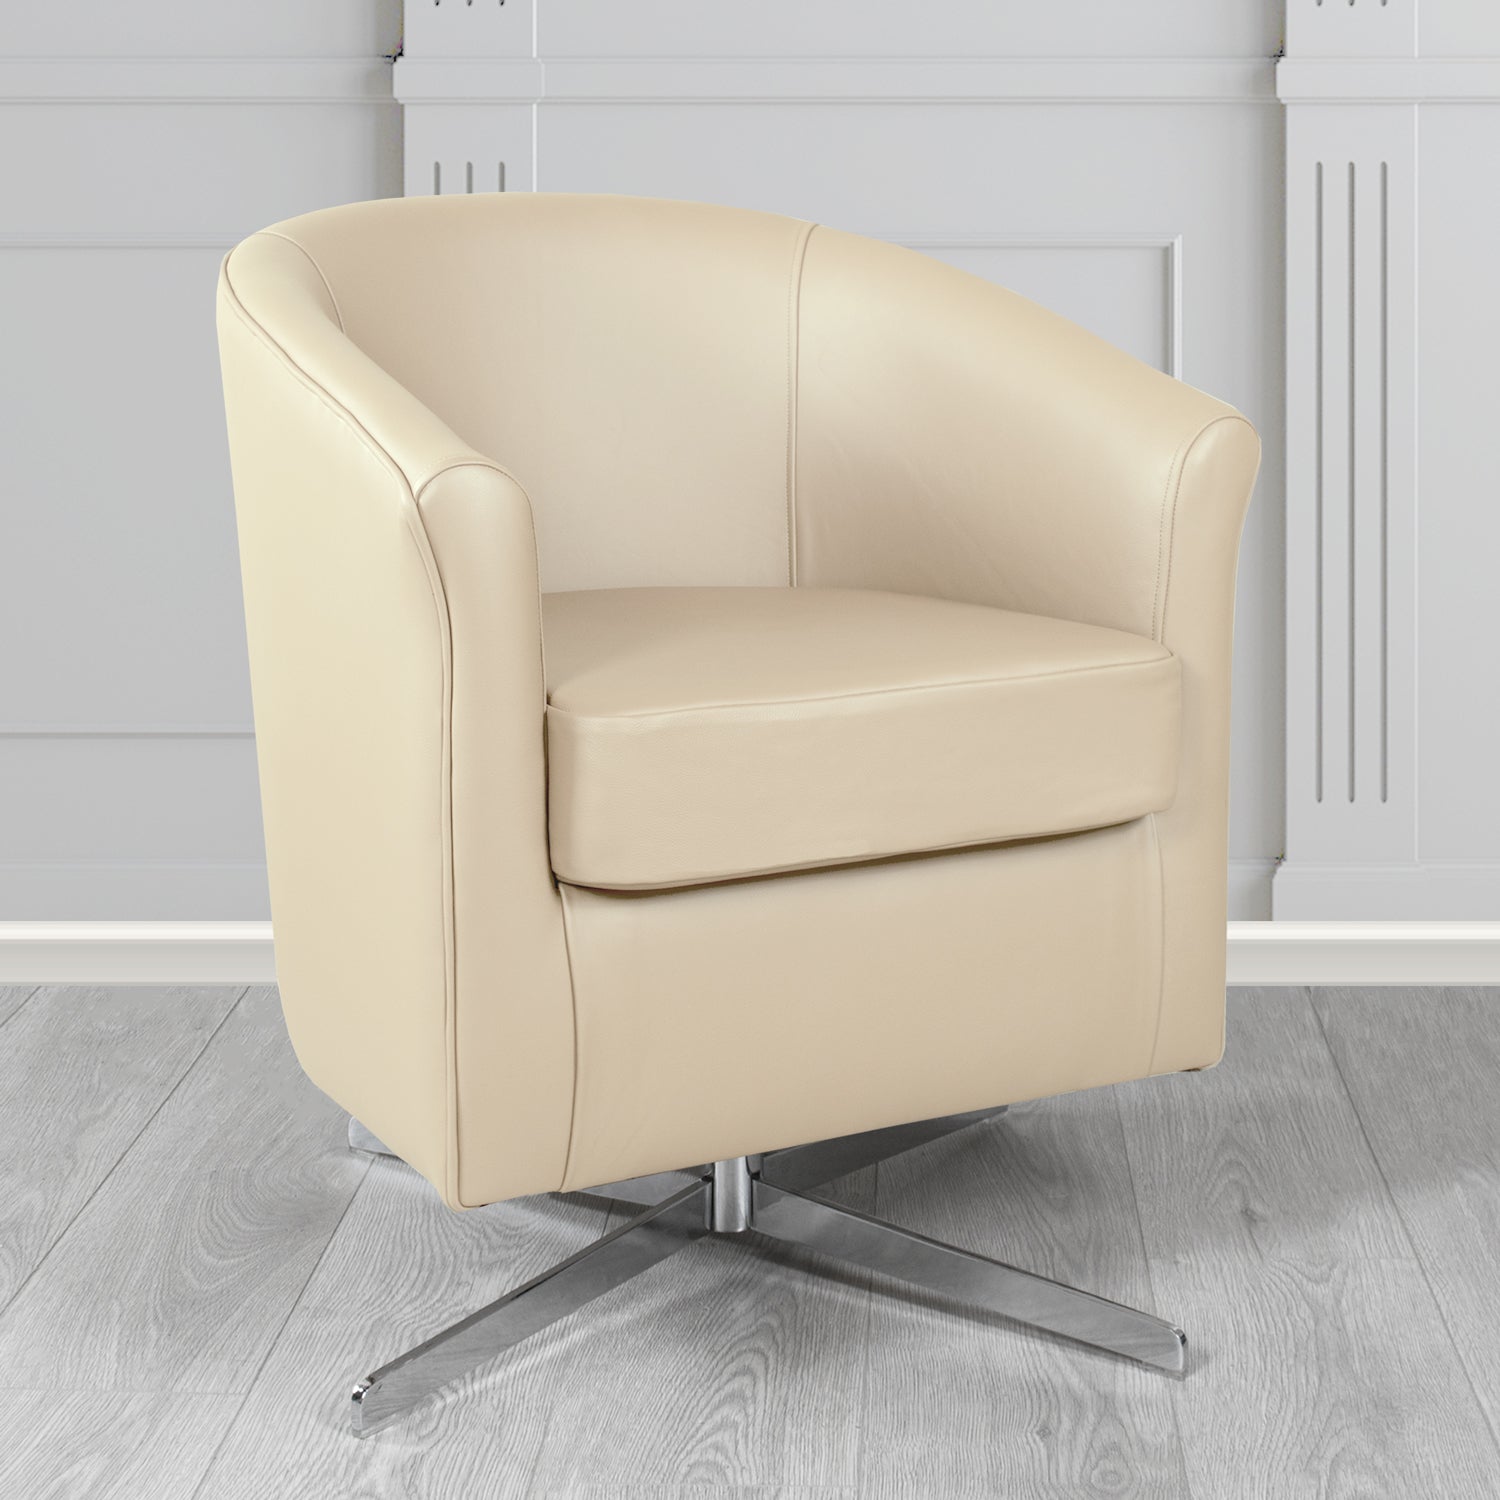 Cannes Swivel Tub Chair in Shelly Almond Crib 5 Genuine Leather - The Tub Chair Shop